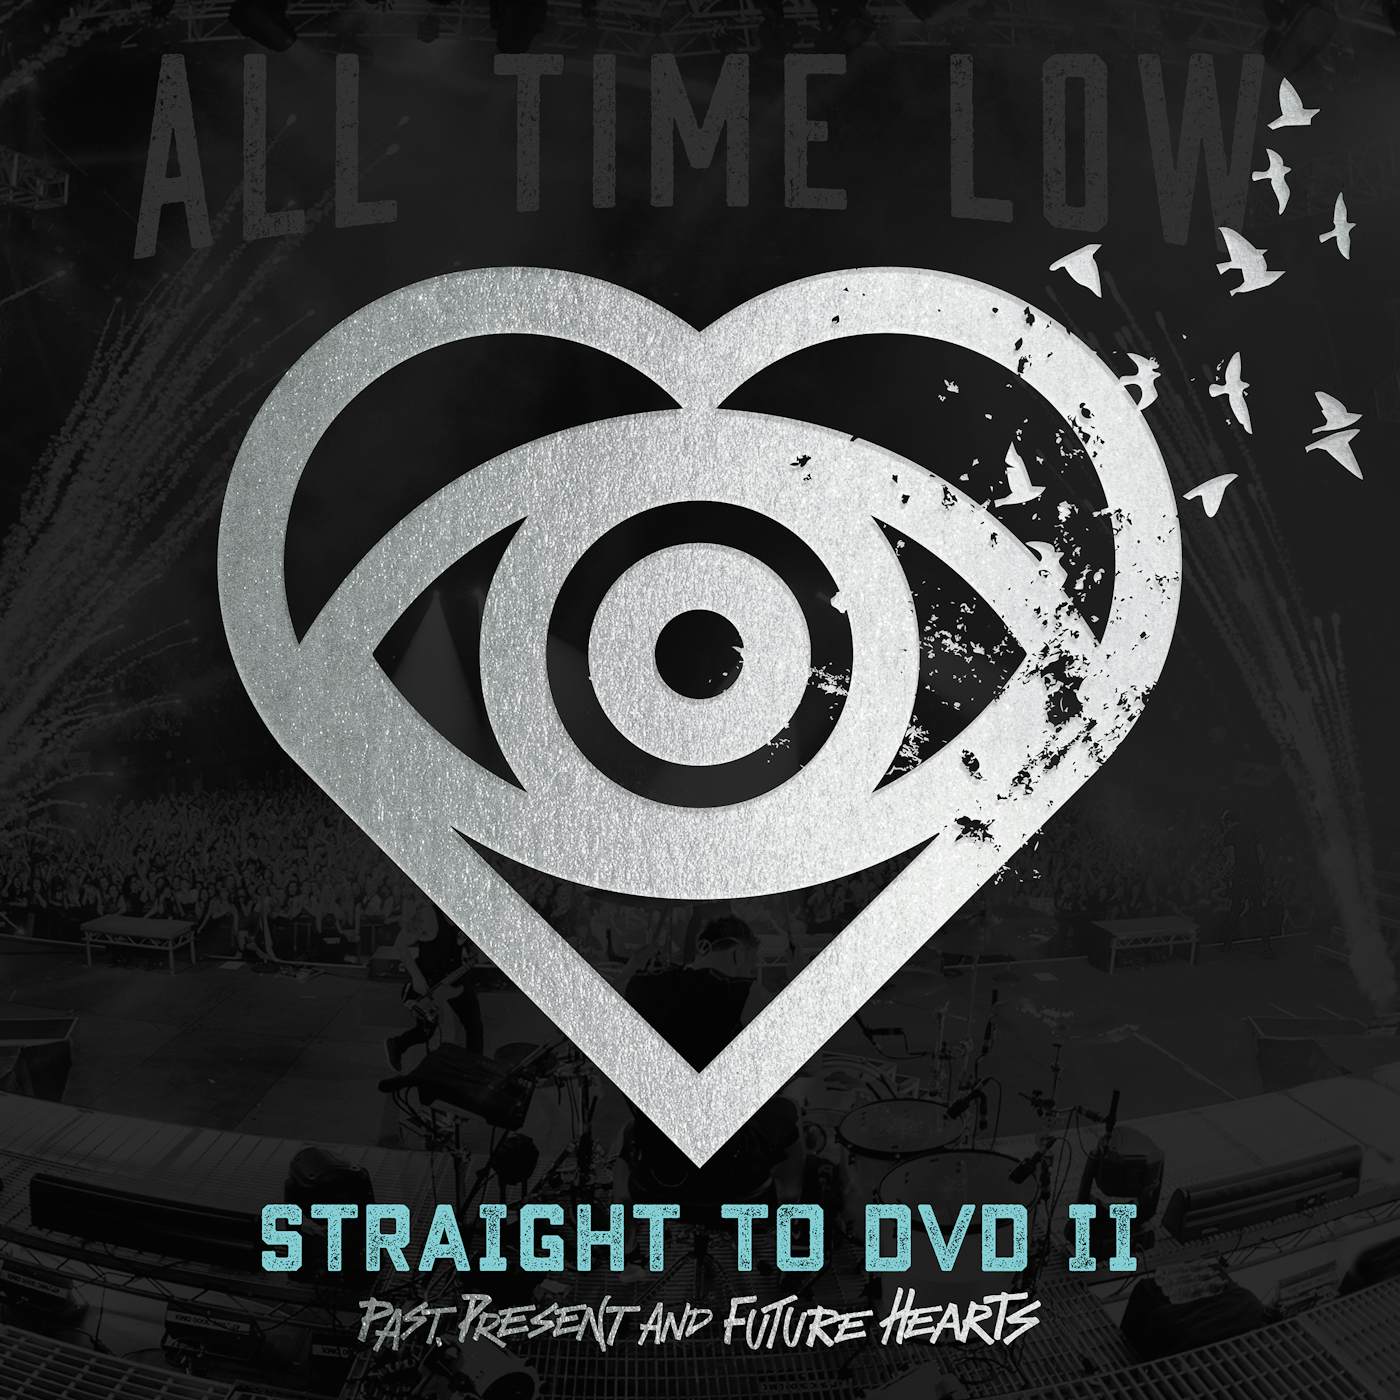 All Time Low STRAIGHT TO DVD II: PAST PRESENT & FUTURE HEARTS CD